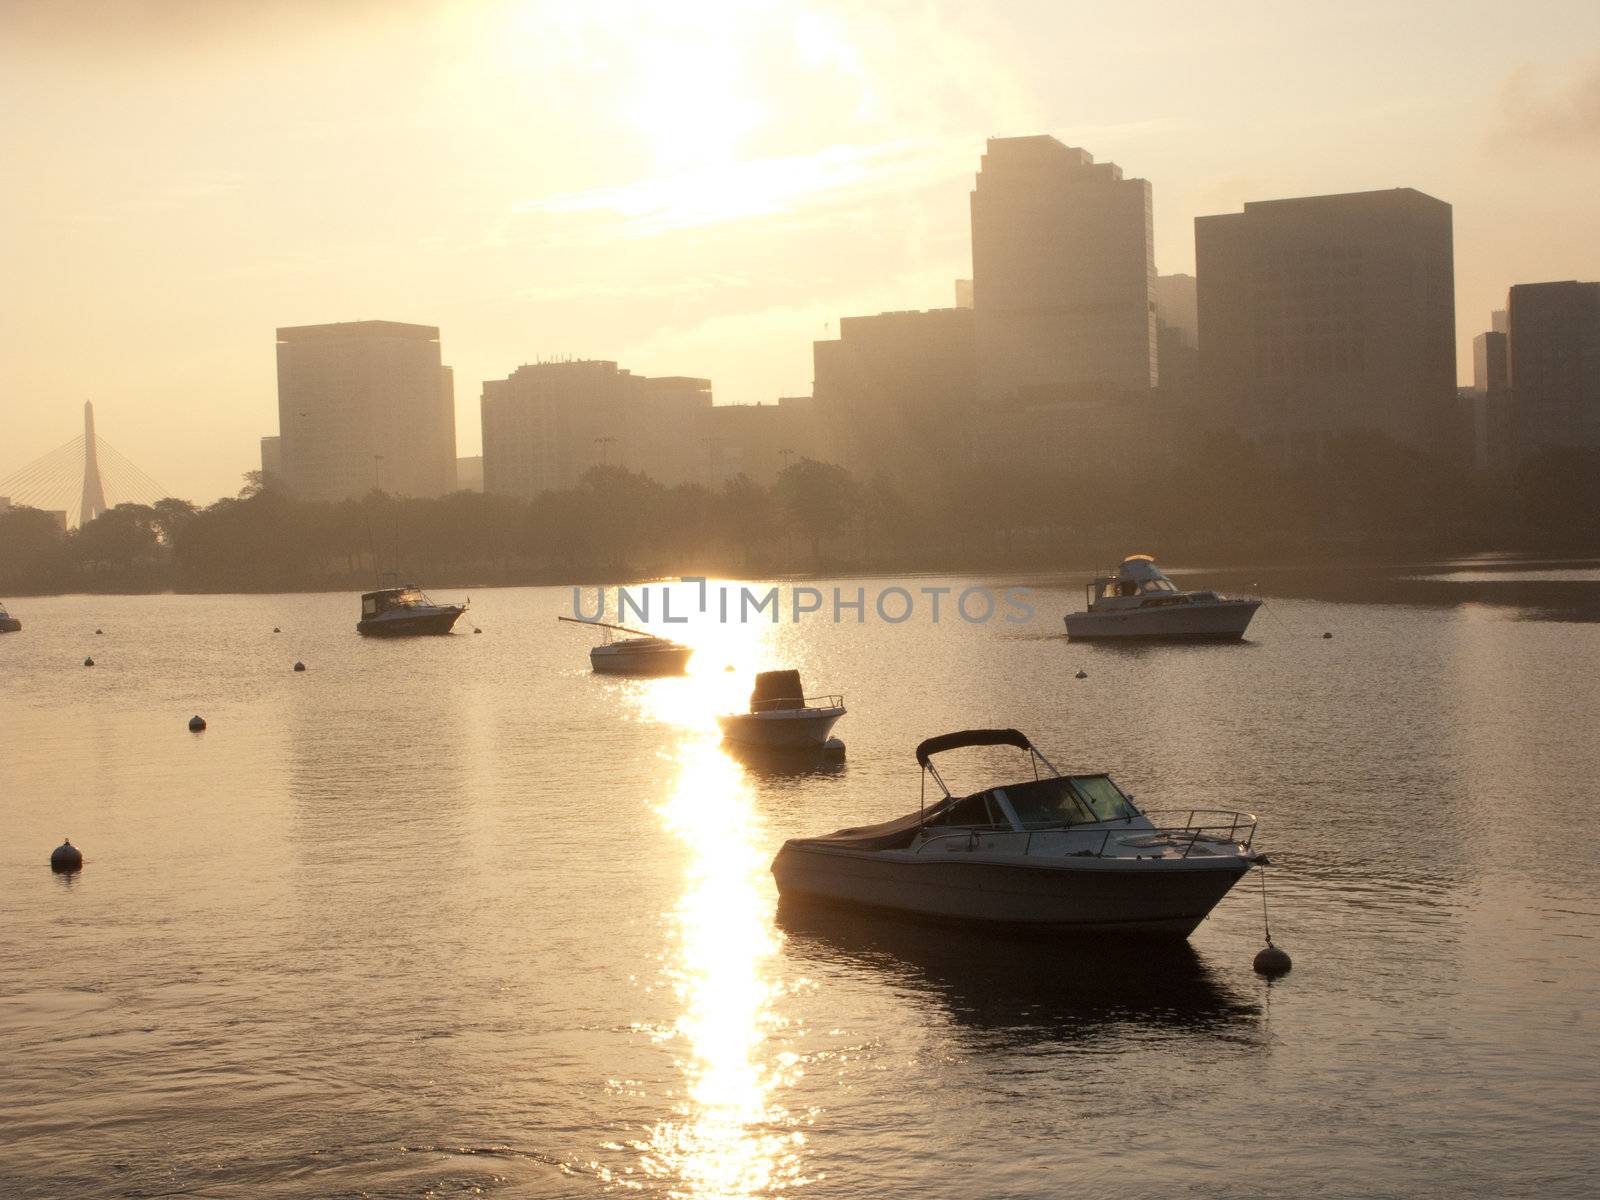 Motorboats anchored in the Charles River in Boston, MA.